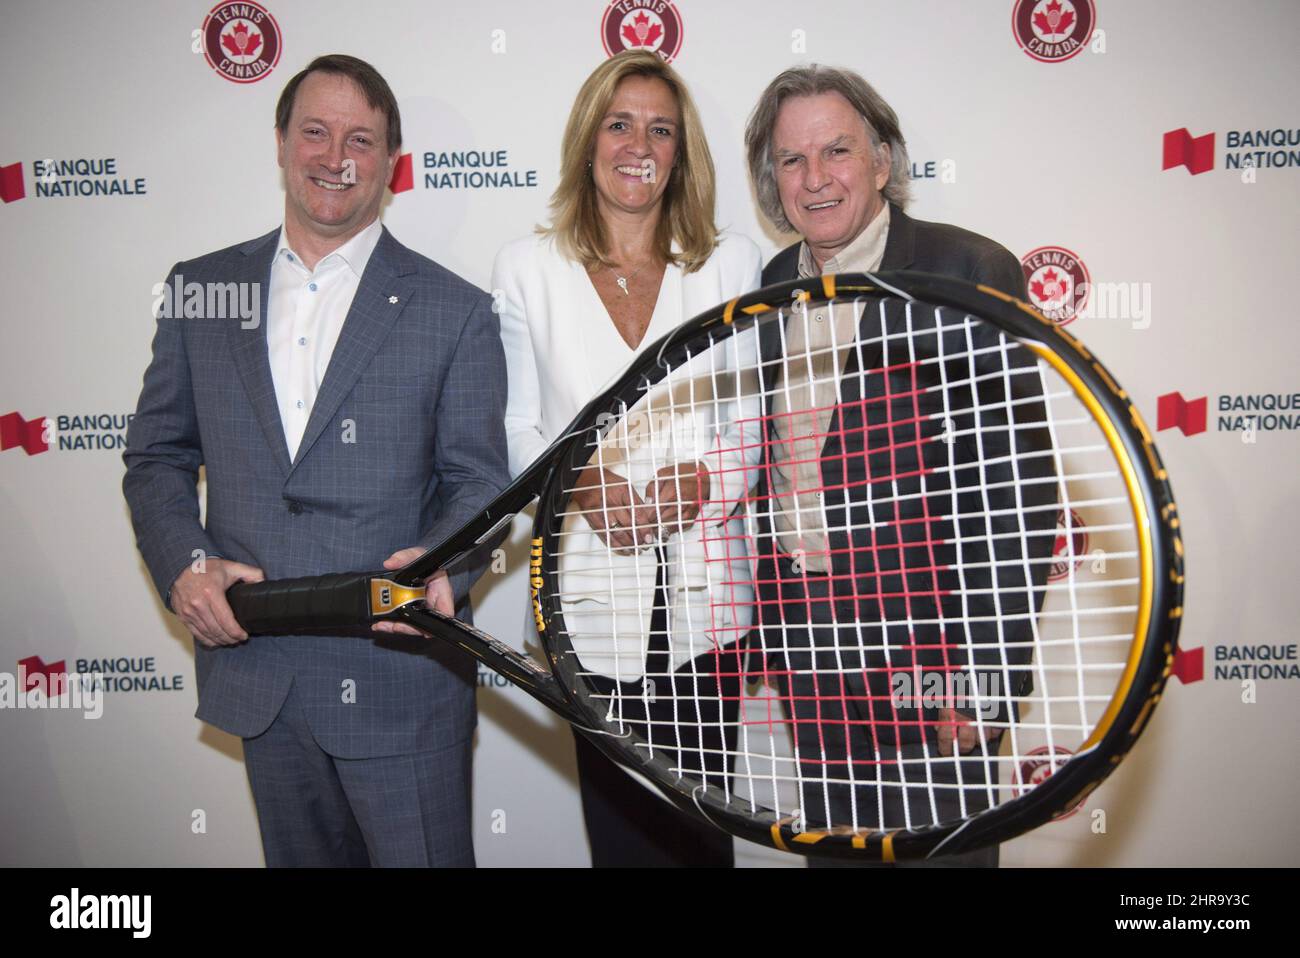 National Bank president and CEO Louis Vachon, Tennis Canada president and  CEO Kelly Murumets and vice-president Eugene Lapierre pose for a photo  after announcing a renewed partnership for a six-year term Tuesday,